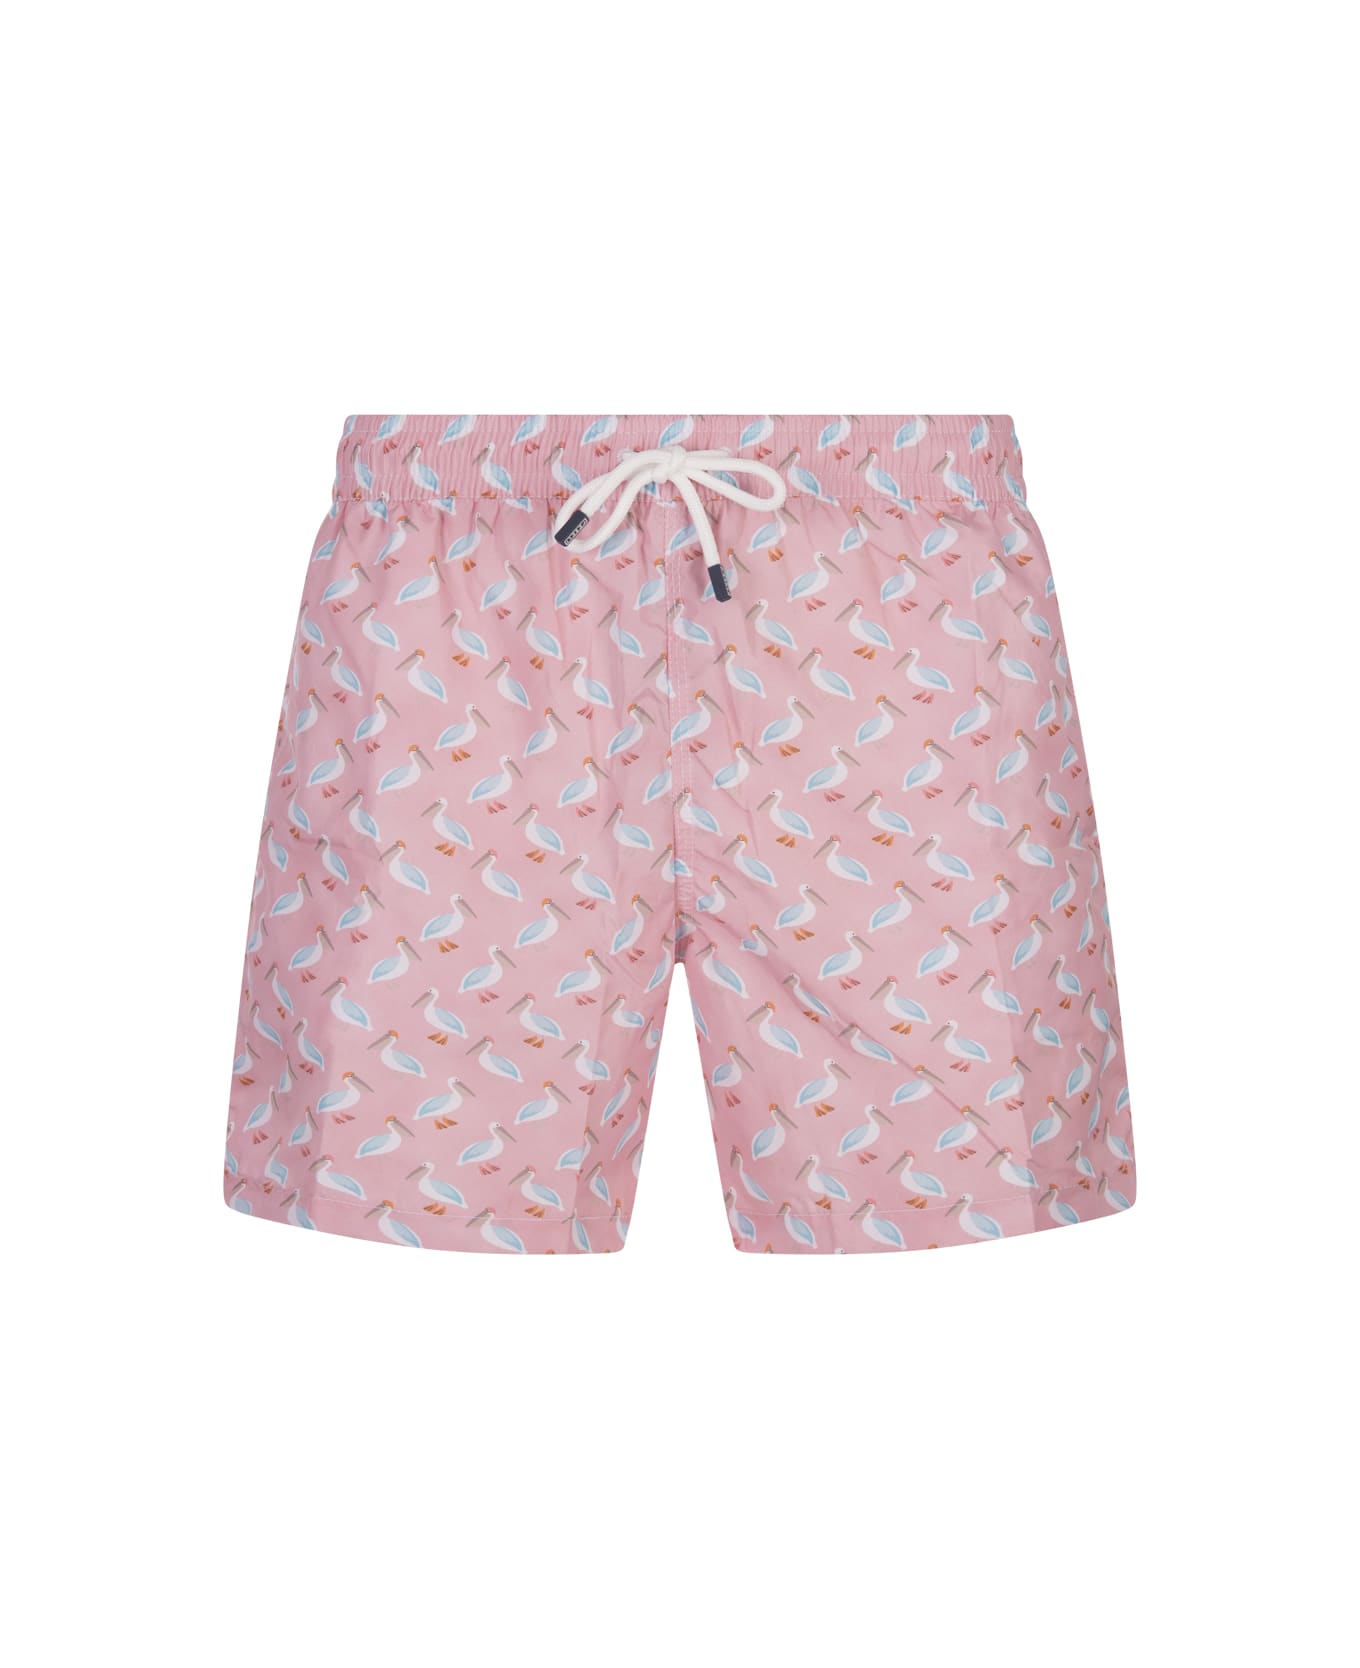 Fedeli Pink Swim Shorts With Pelican Pattern - Pink